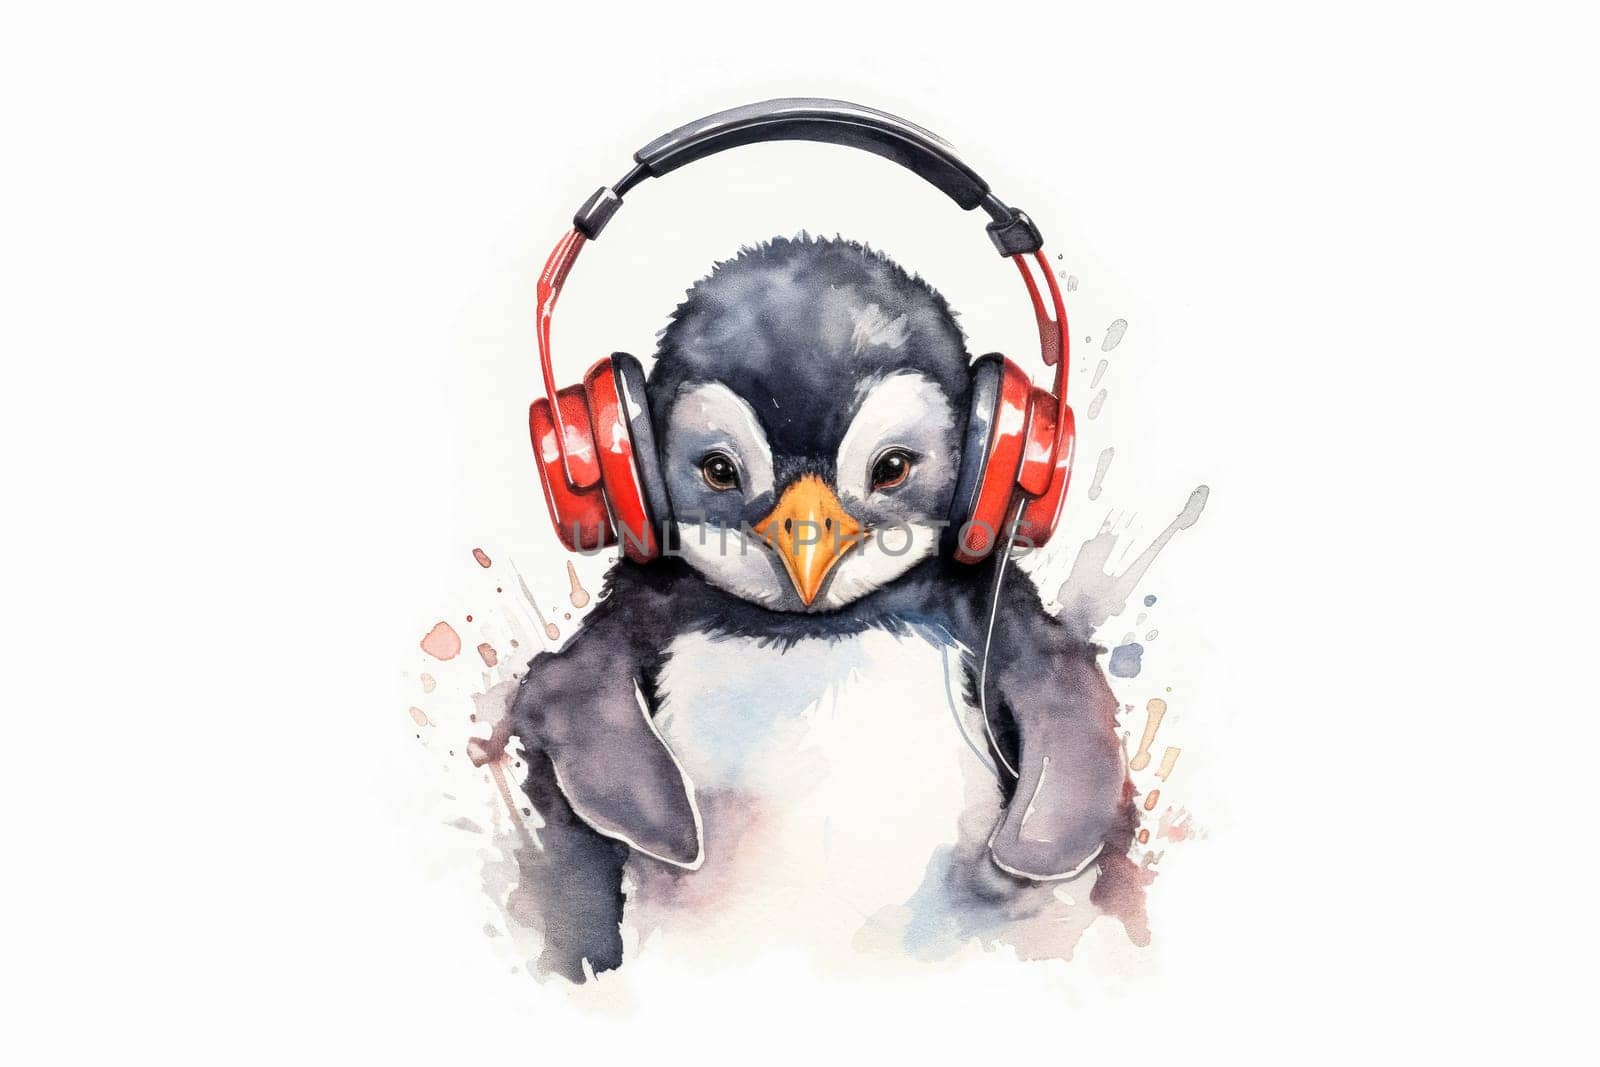 A lively watercolor artwork featuring a cute penguin wearing headphones, immersed in splashes of vibrant colors, adding a playful touch to the scene.